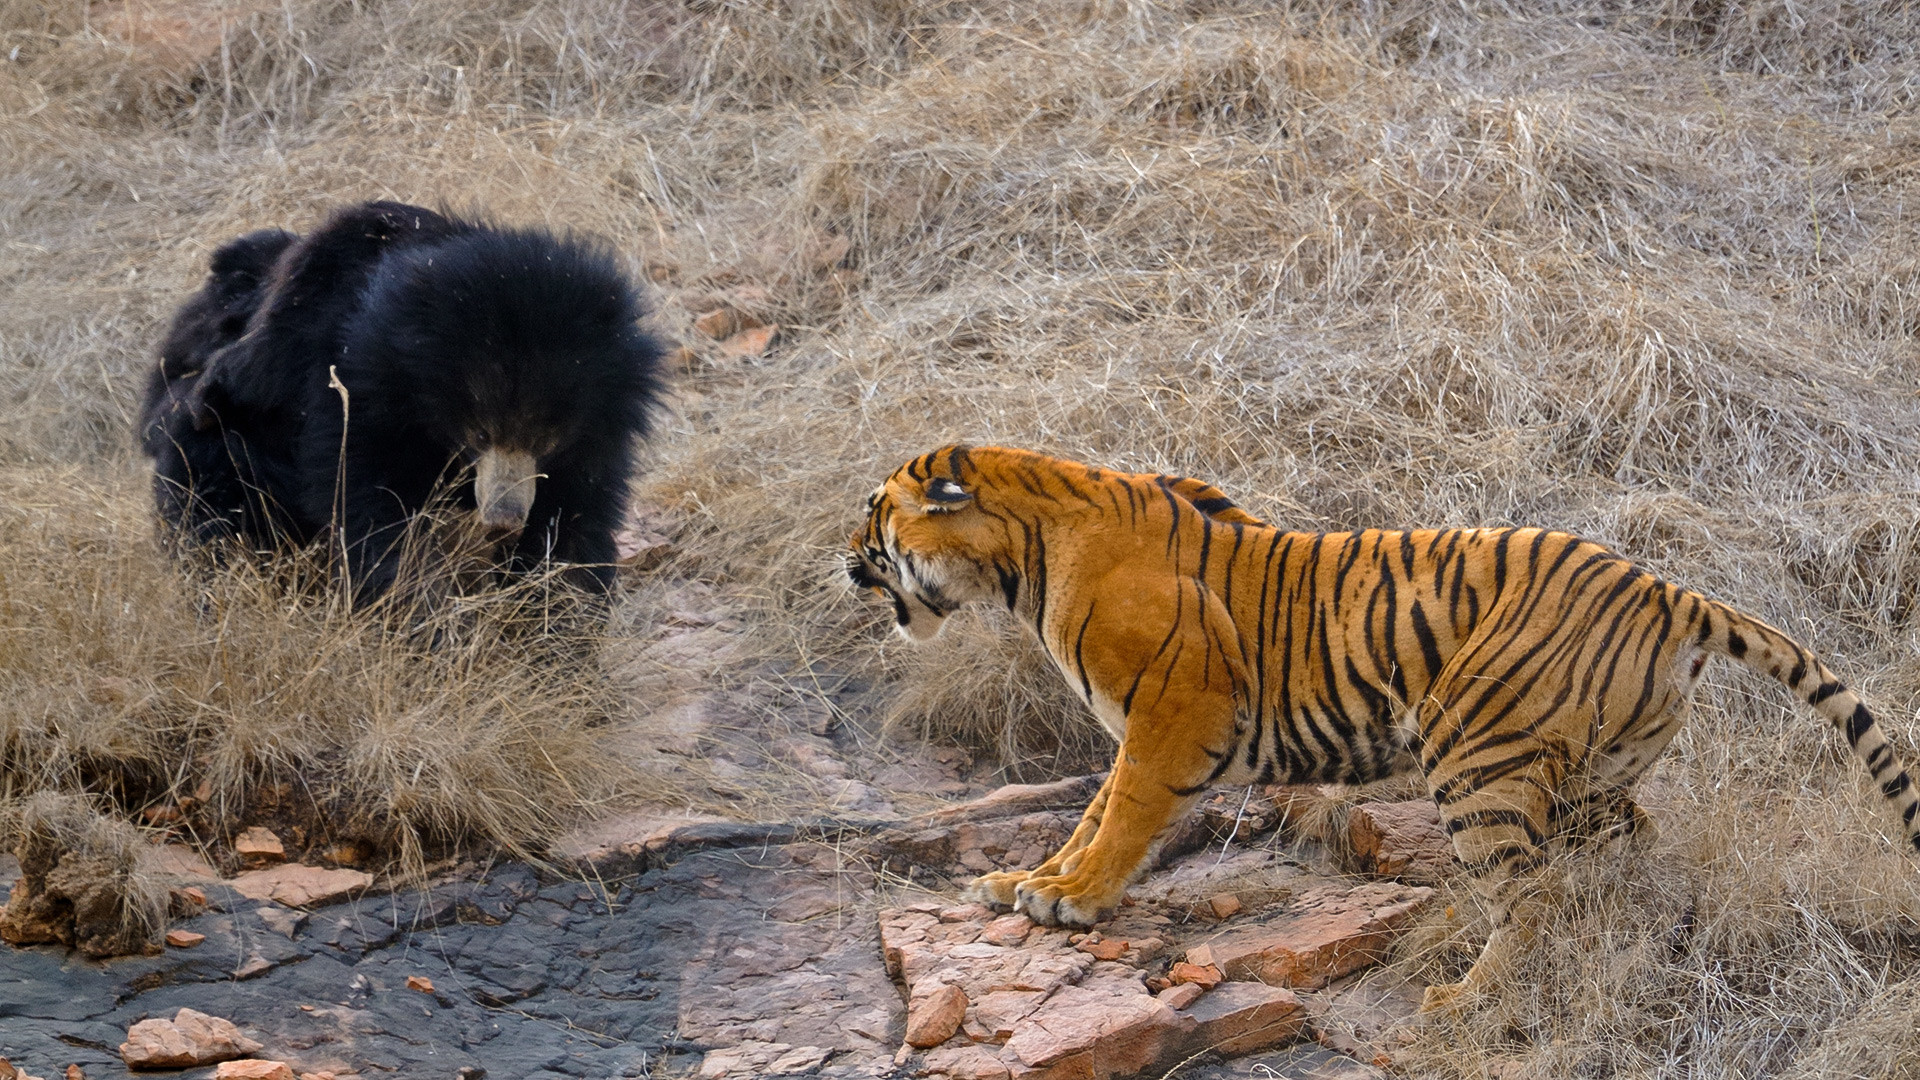 Bear and tiger fight